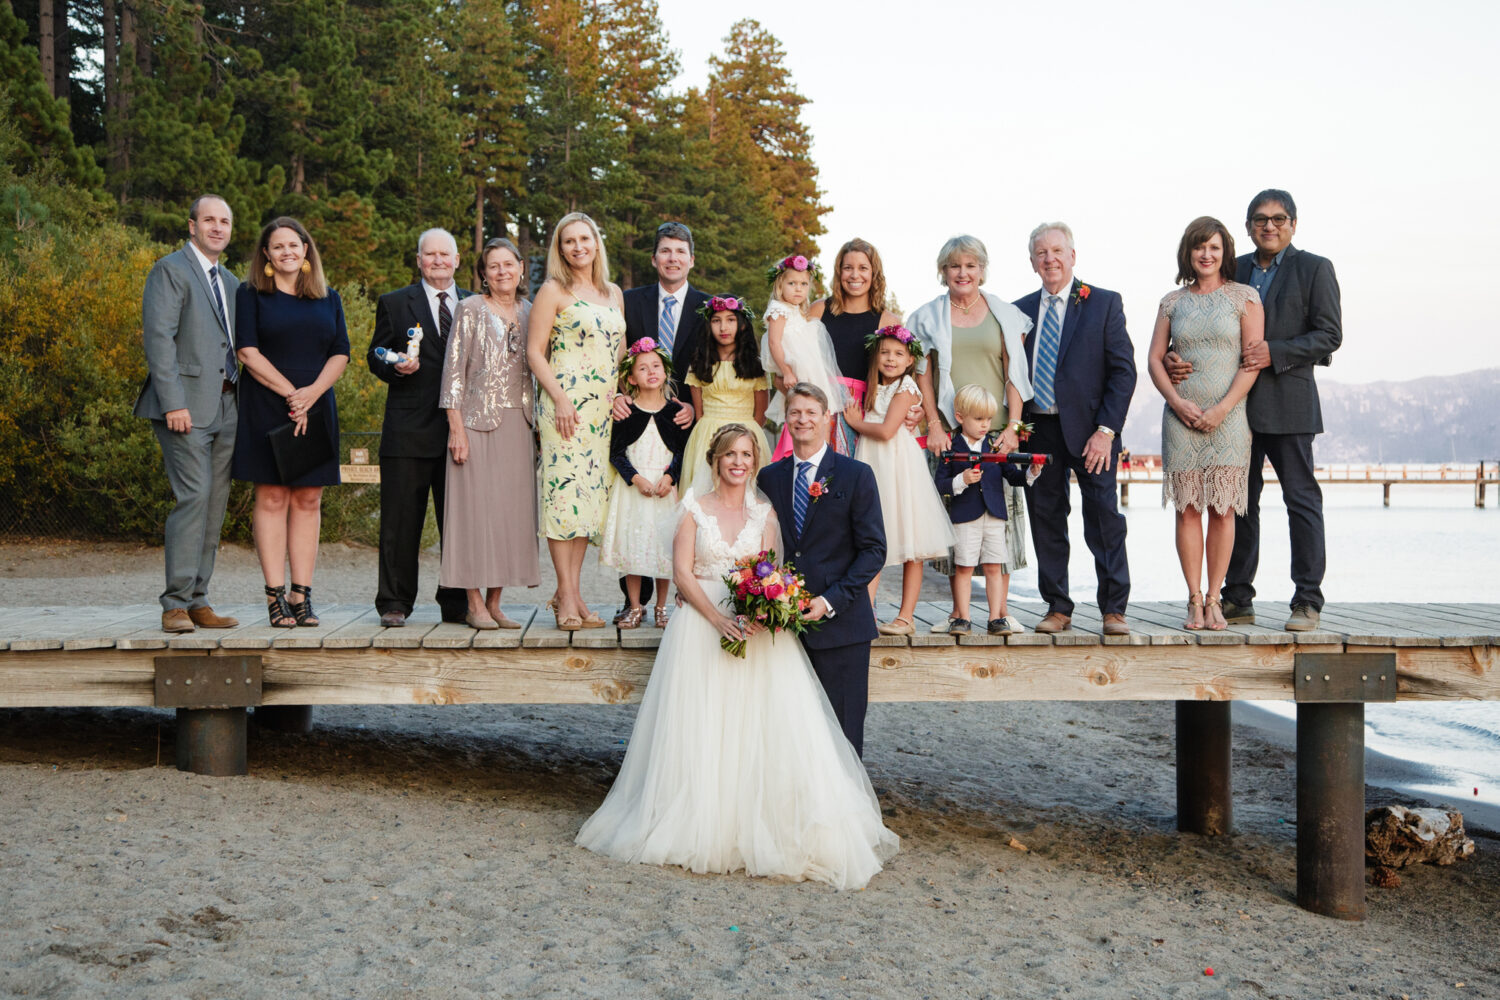 A couple that decided to get married on a dock in Lake Tahoe poses with their families.